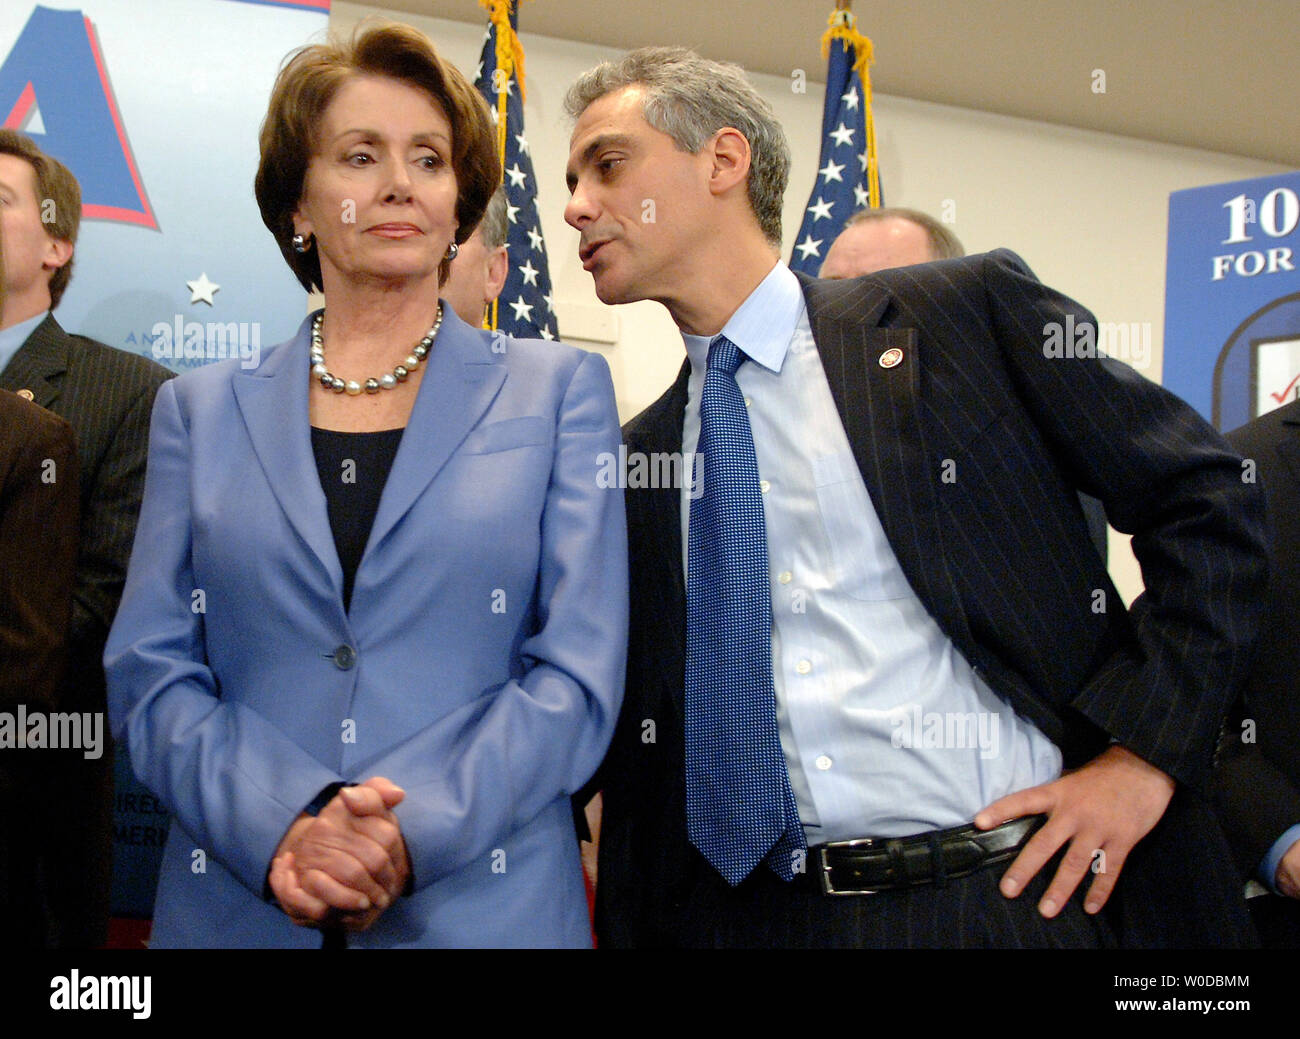 Rep. Rahm Emanuel (D-IL) speaks to Speaker of the House Nancy Pelosi (D-CA) at a press conference marking the first 100 legislative hours of the new Congress, in Washington on January 18, 2007. (UPI Photo/Kevin Dietsch) Stock Photo